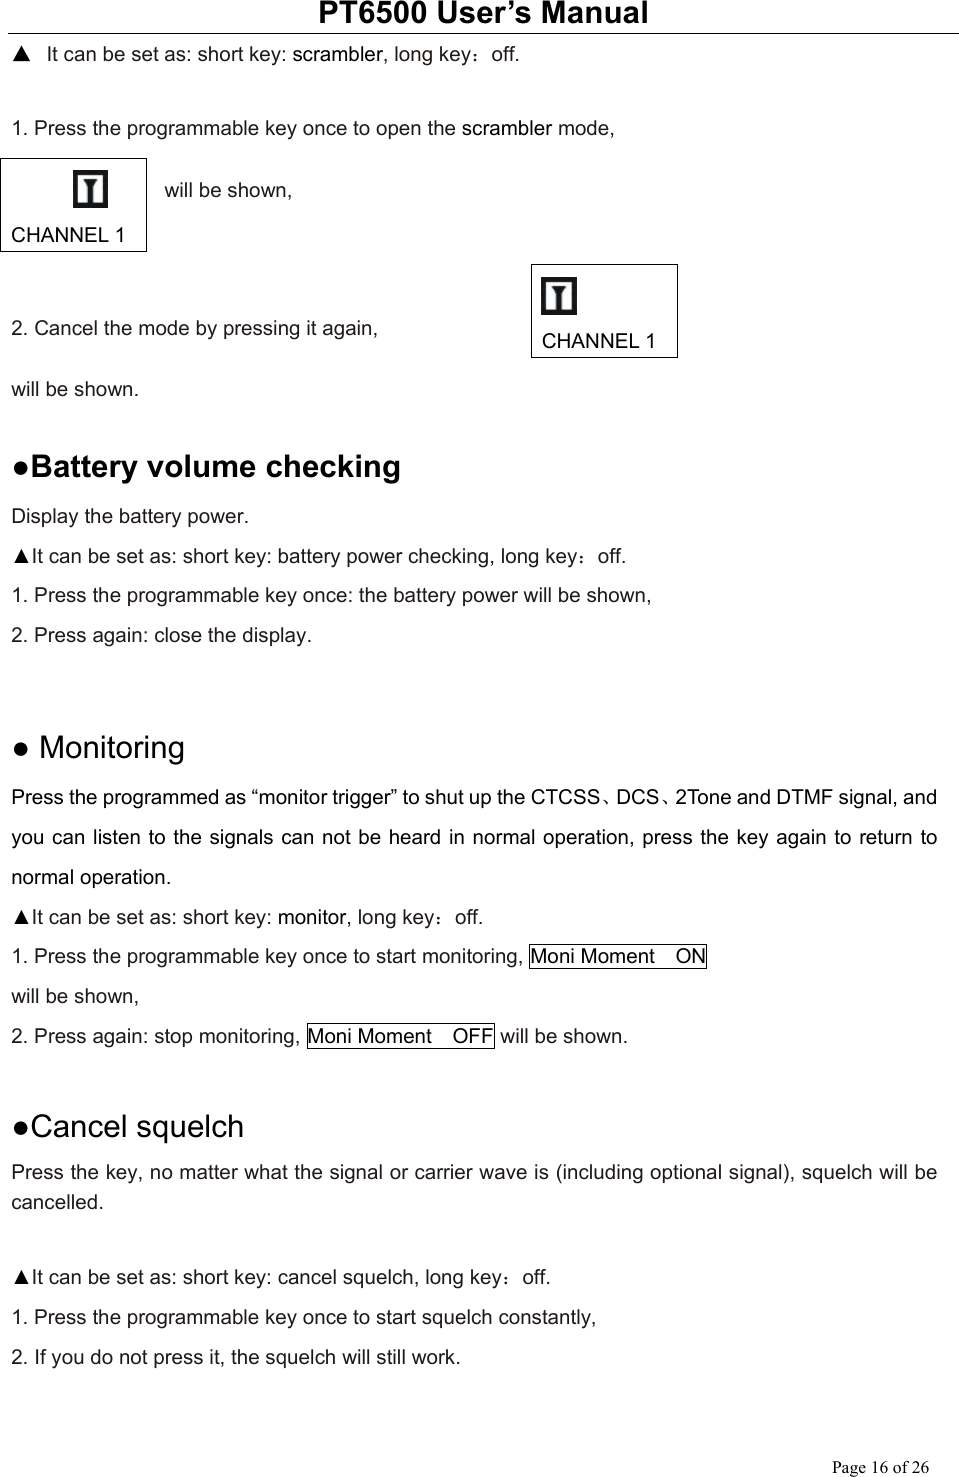 PT6500 User’s Manual Page 16 of 26 ▲ It can be set as: short key: scrambler, long key：off.  1. Press the programmable key once to open the scrambler mode,      will be shown,    2. Cancel the mode by pressing it again,    will be shown.      ●Battery volume checking Display the battery power. ▲It can be set as: short key: battery power checking, long key：off. 1. Press the programmable key once: the battery power will be shown, 2. Press again: close the display.     ● Monitoring Press the programmed as “monitor trigger” to shut up the CTCSS、DCS、2Tone and DTMF signal, and you can listen to the signals can not be heard in normal operation, press the key again to return to normal operation. ▲It can be set as: short key: monitor, long key：off. 1. Press the programmable key once to start monitoring, Moni Moment    ON will be shown, 2. Press again: stop monitoring, Moni Moment    OFF will be shown.     ●Cancel squelch Press the key, no matter what the signal or carrier wave is (including optional signal), squelch will be cancelled.  ▲It can be set as: short key: cancel squelch, long key：off. 1. Press the programmable key once to start squelch constantly, 2. If you do not press it, the squelch will still work.      CHANNEL 1  CHANNEL 1 